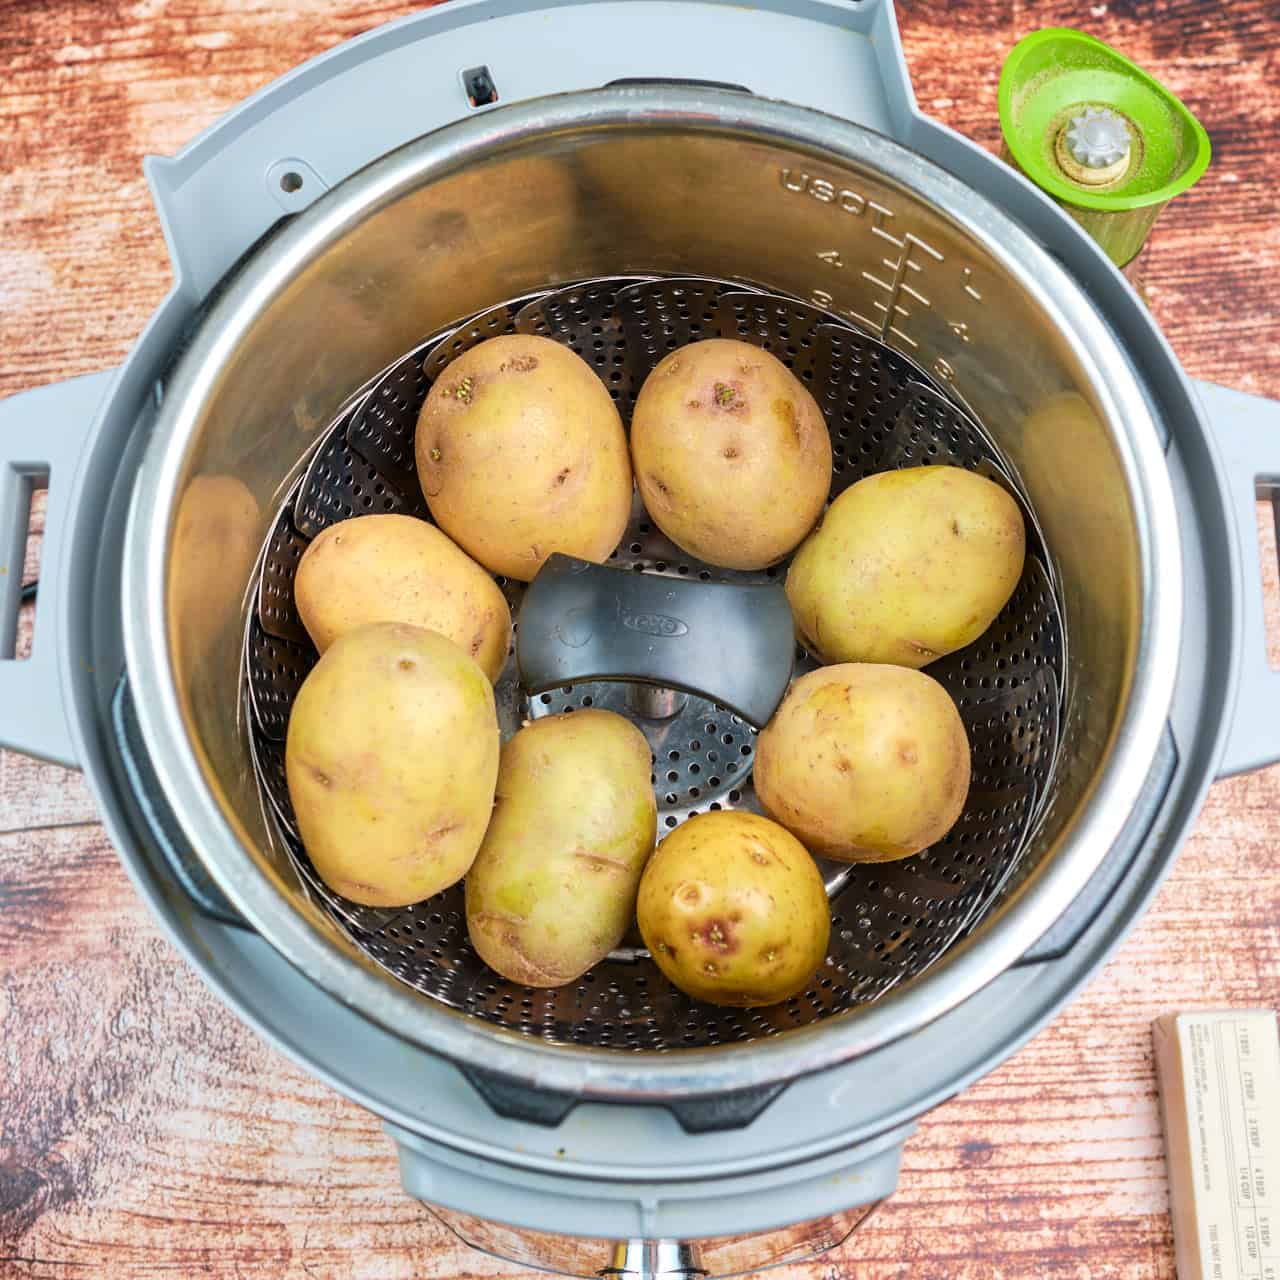 Potatoes in a vegetable steamer in an Instant Pot, ready to cook